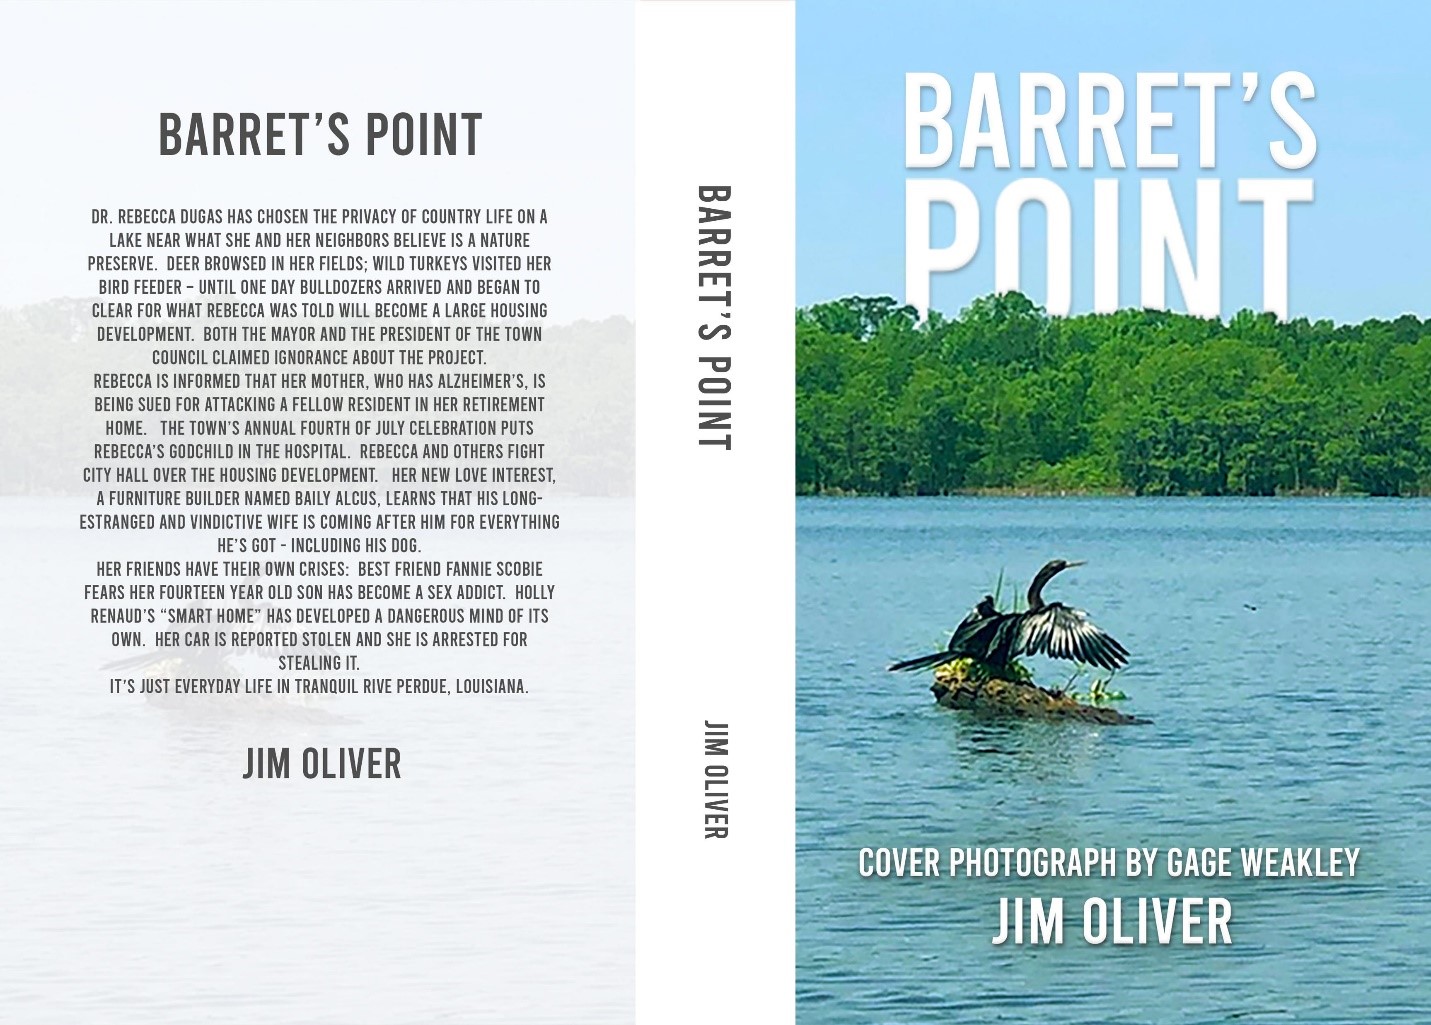 "Barrett's Point": A Tale of Intrigue, Community, and Resilience by Jim Oliver